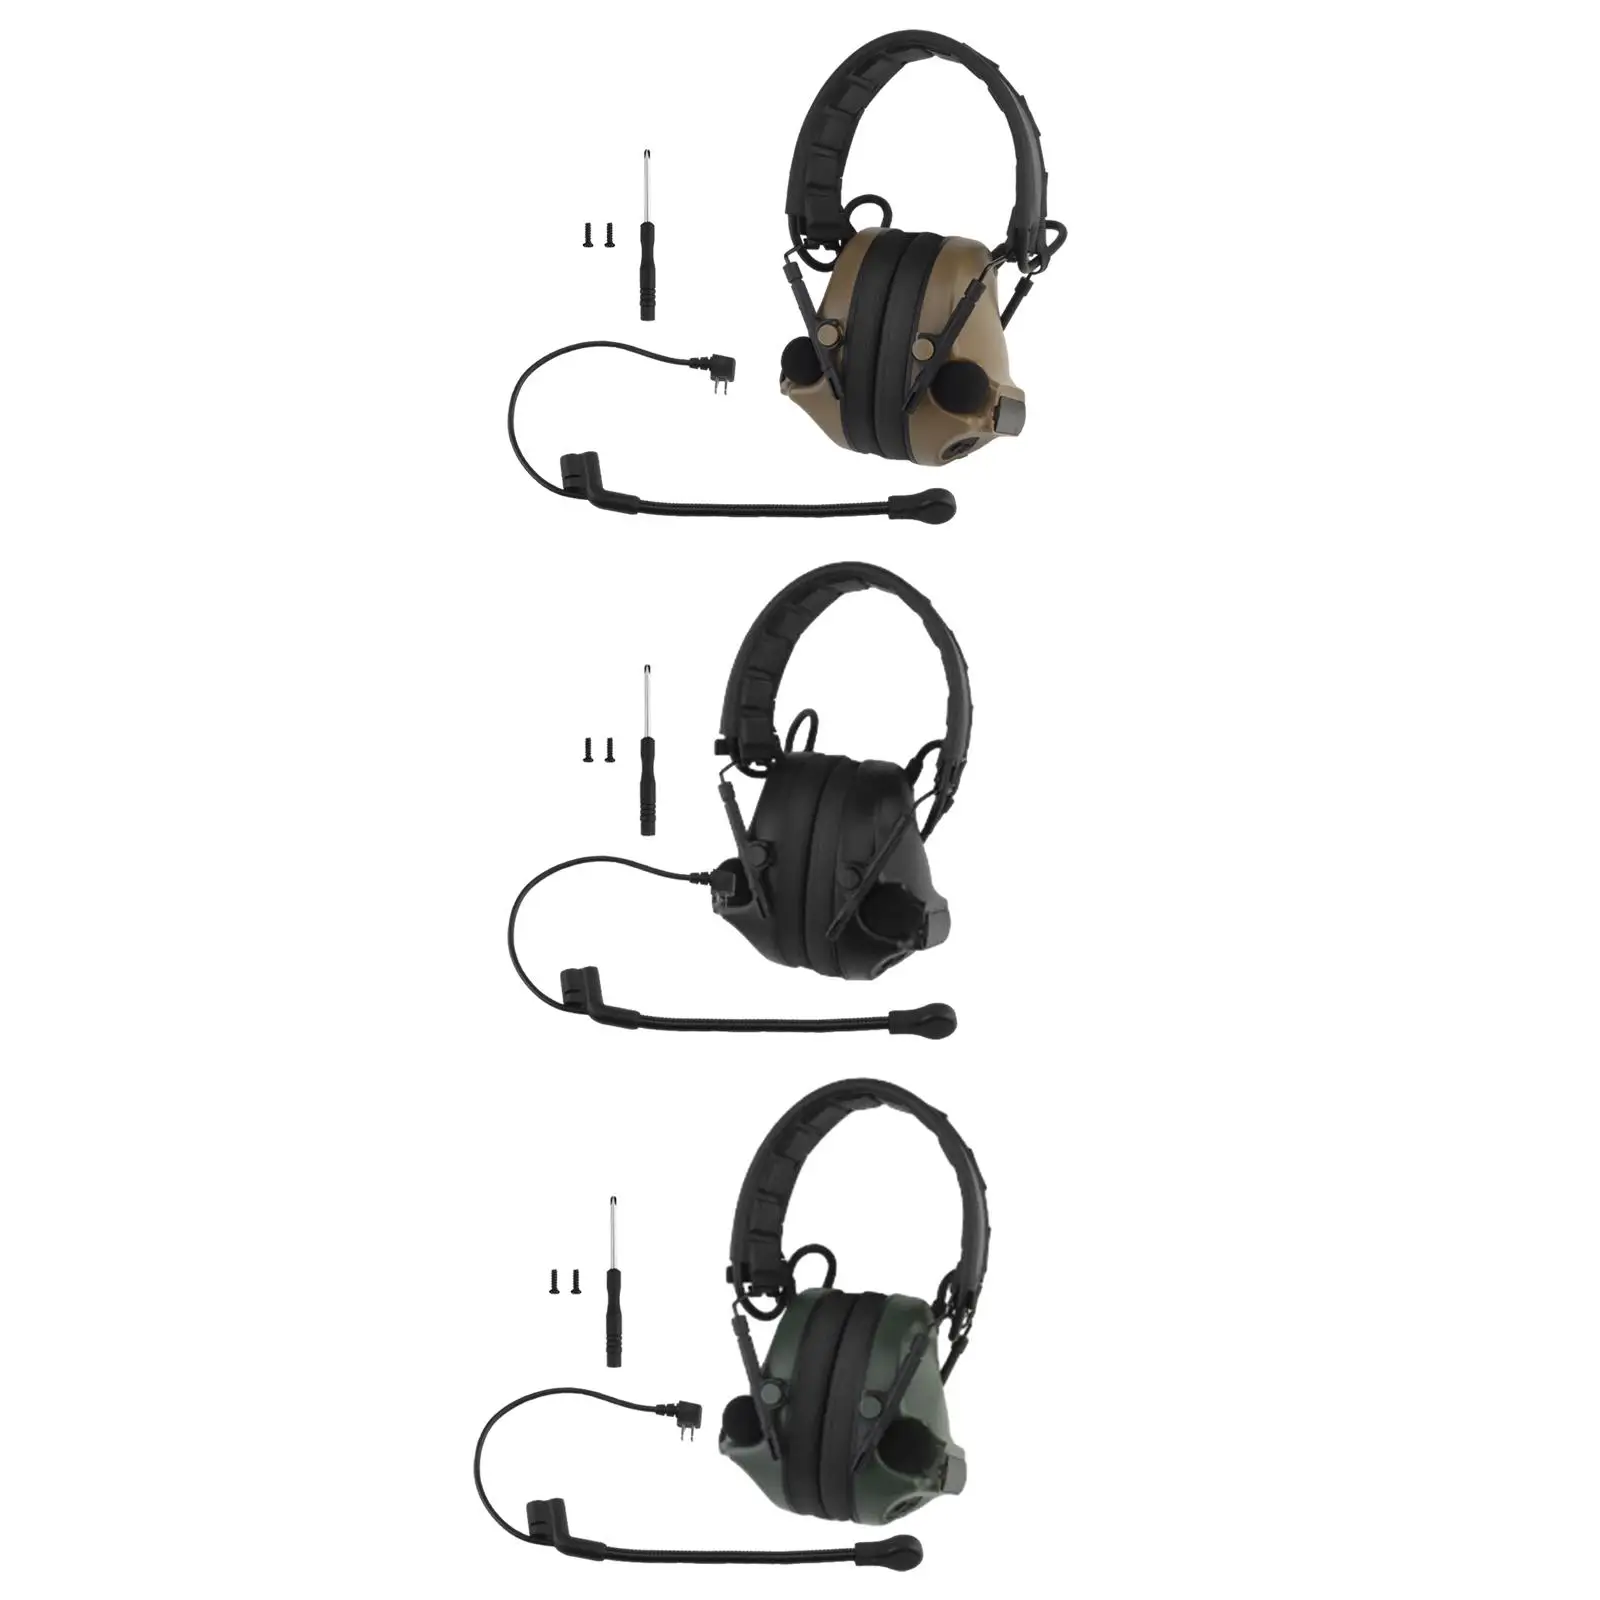 Hearing Protectors Ear Covers Earphones Compact Soundproof Earmuffs Ear Cups for Manufacturing Business Sleeping Travel Learning